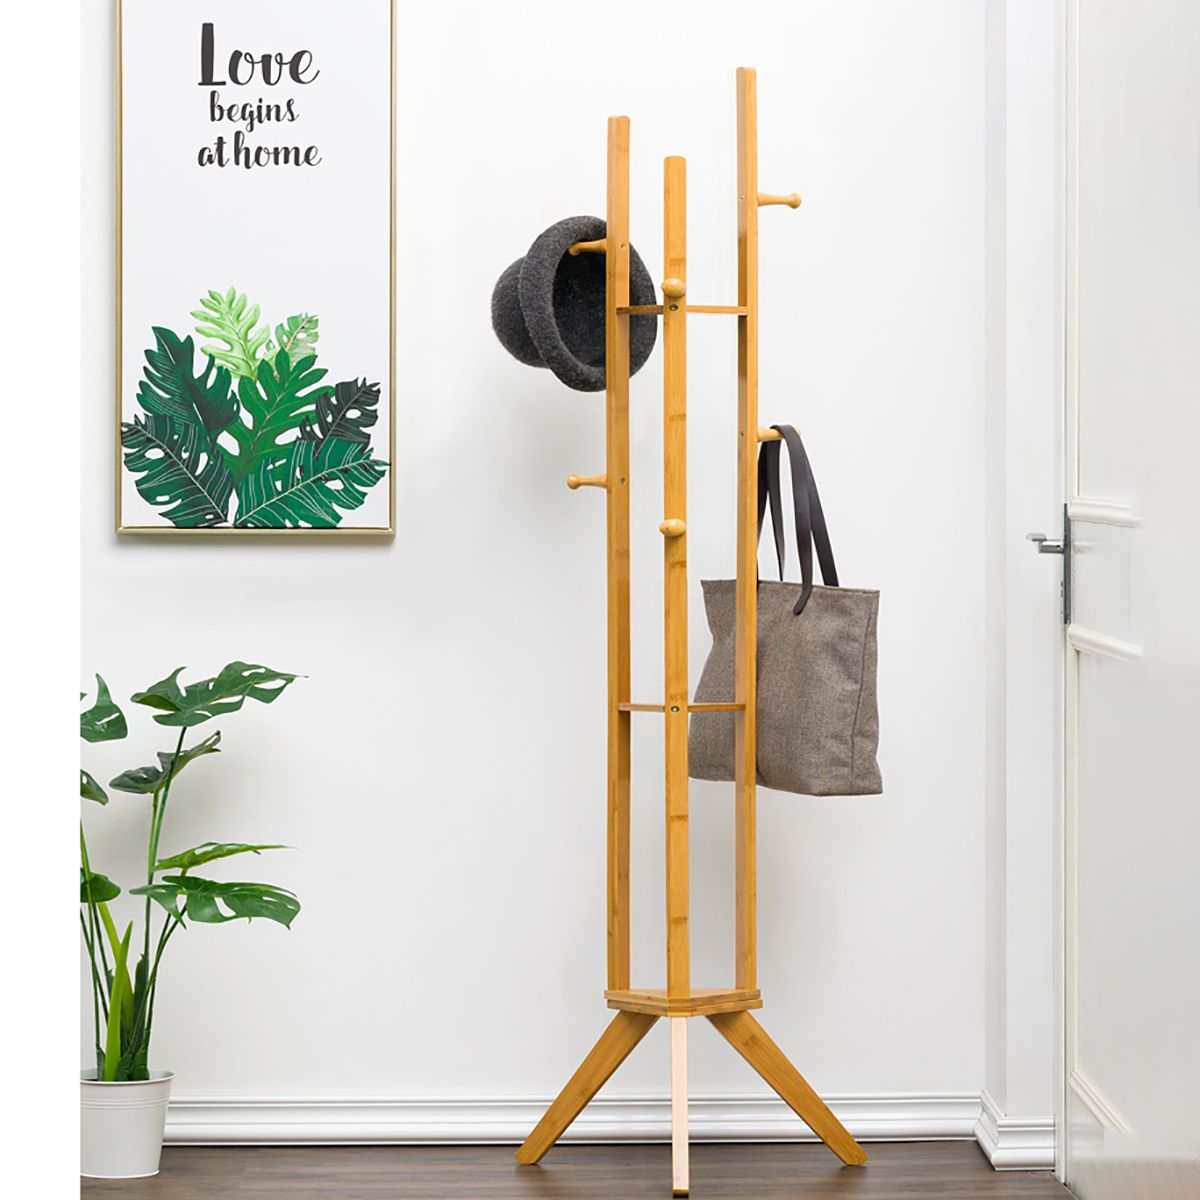 Coat-Rack-Stand-Coat-Tree-Cloth-Hanger-Hall-Tree-Free-Standing-Farmhouse-Style-Bamboo-Rack-Holder-wi-1576462